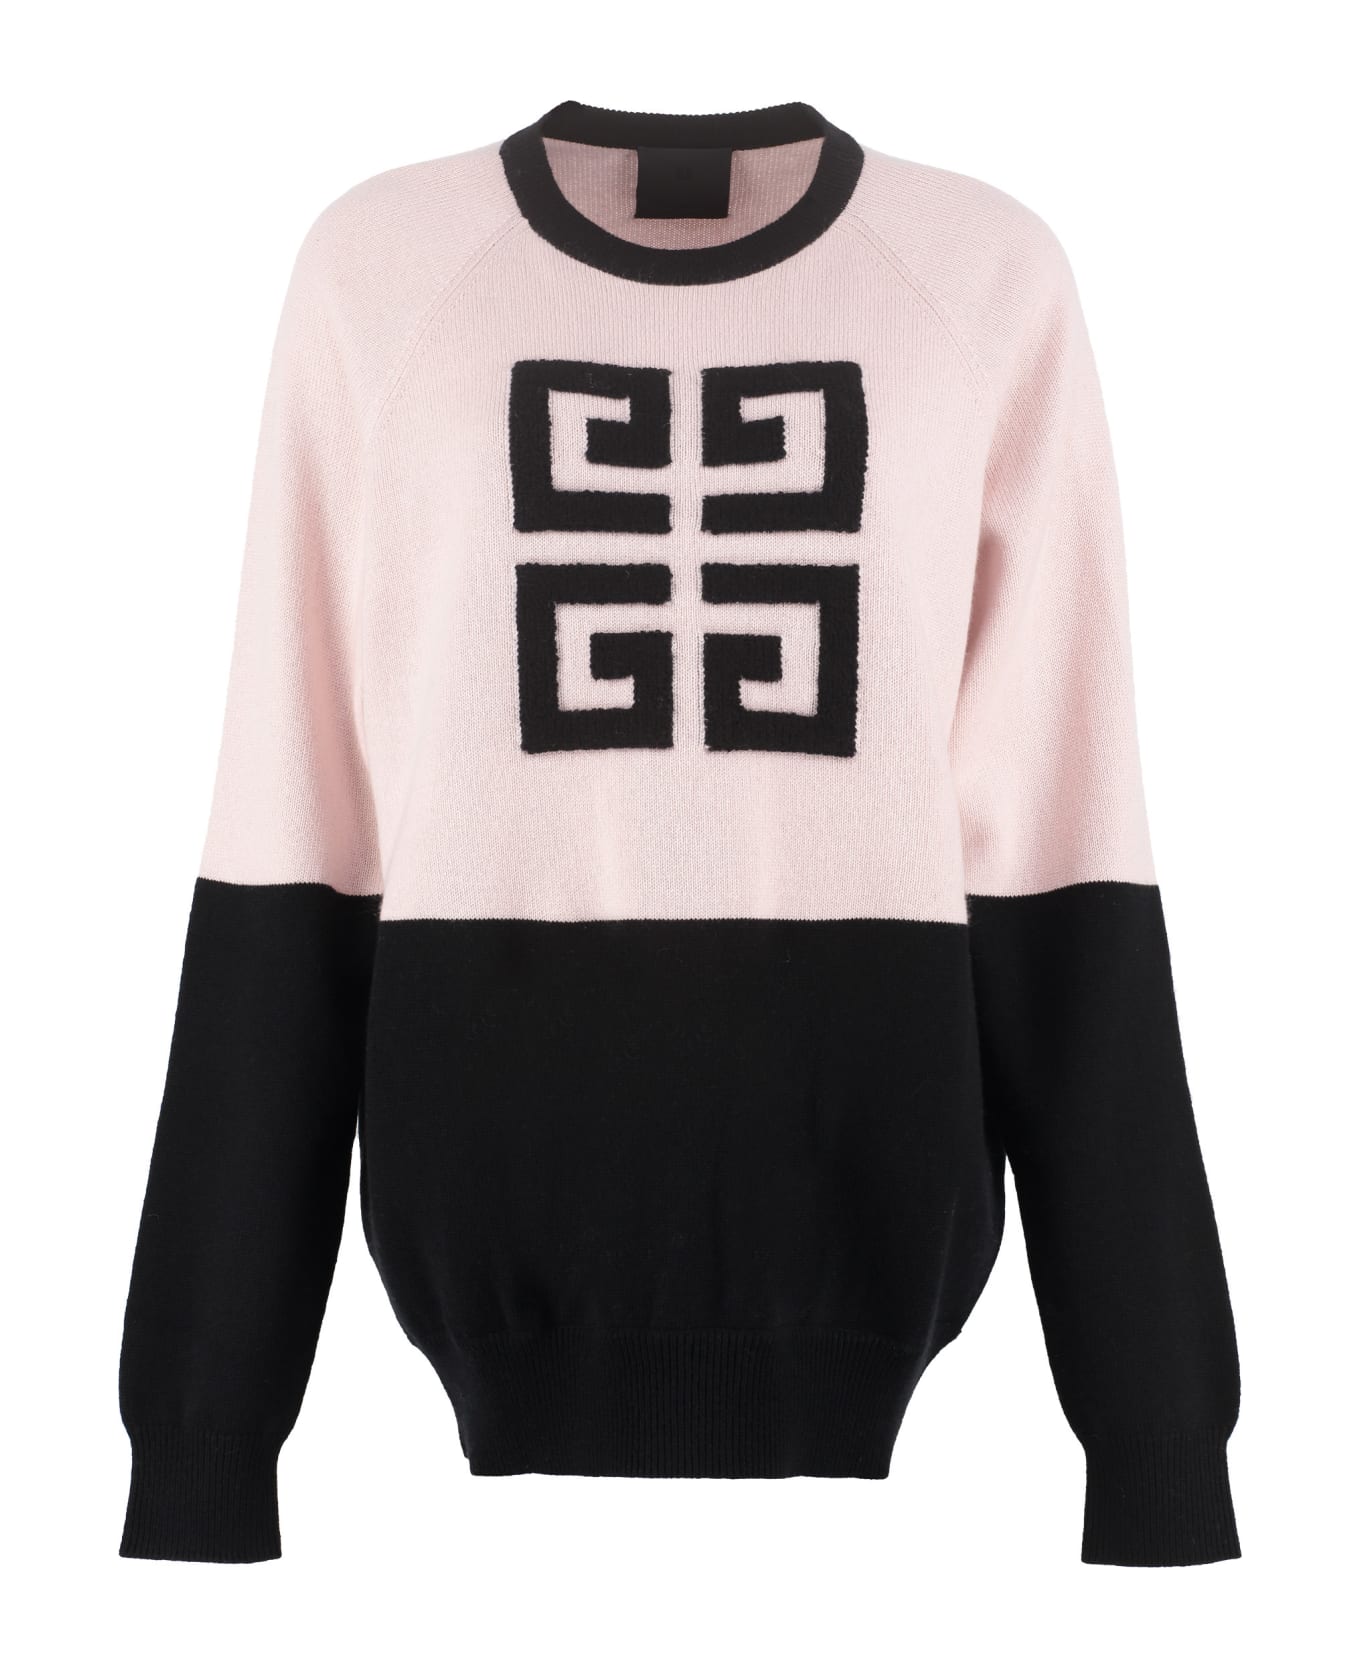 Givenchy Logo Intarsia Cashmere Sweater - Pink